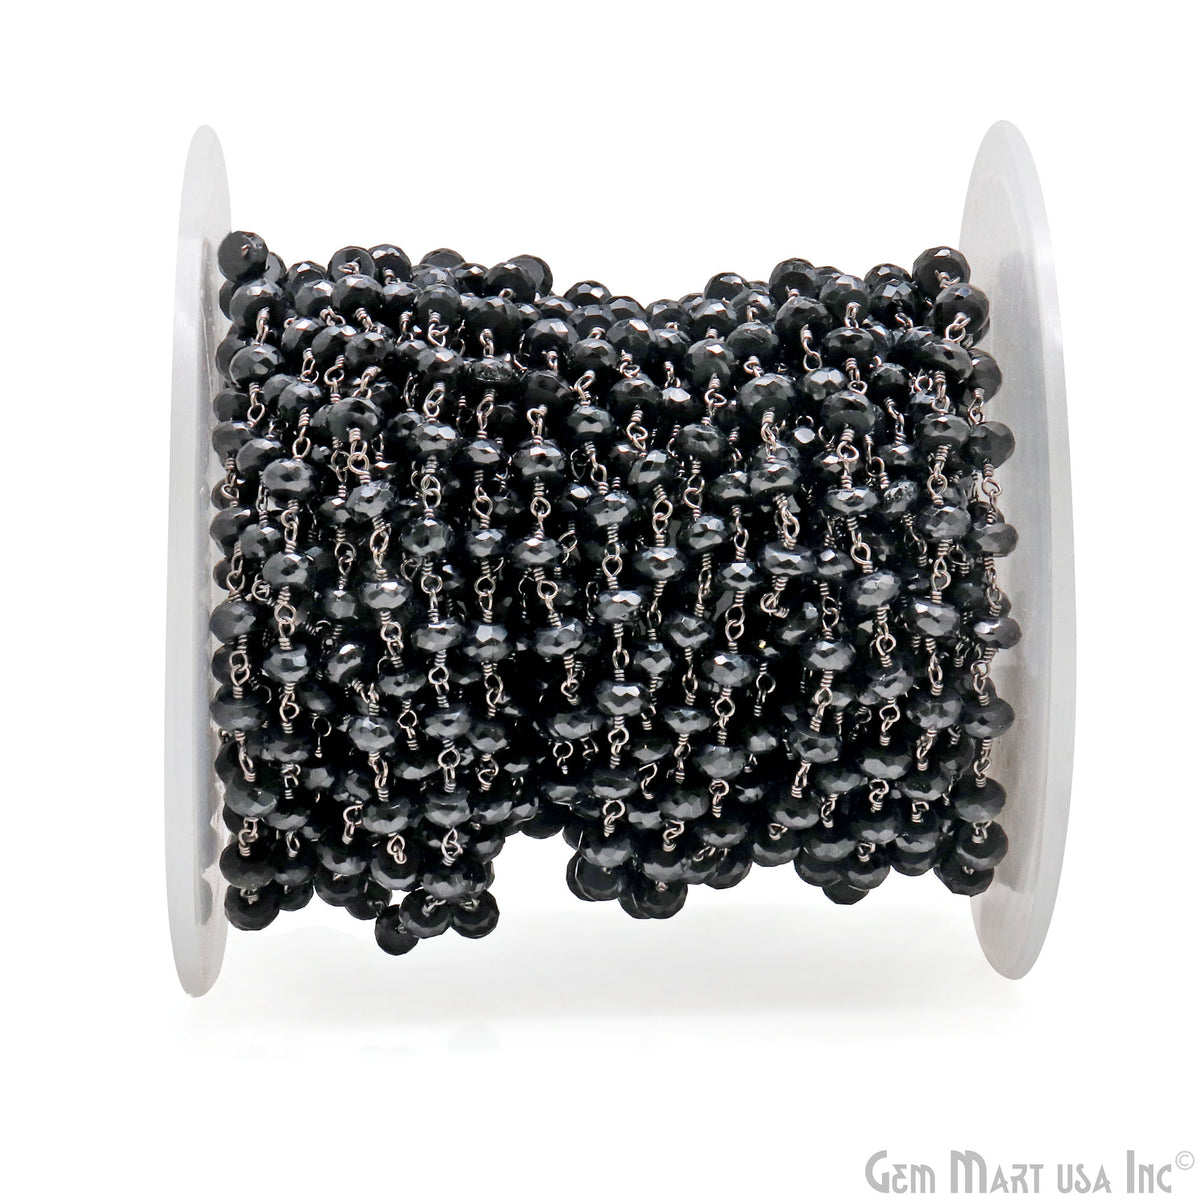 Black Spinel 5-6mm Oxidized Wire Wrapped Beads Rosary Chain